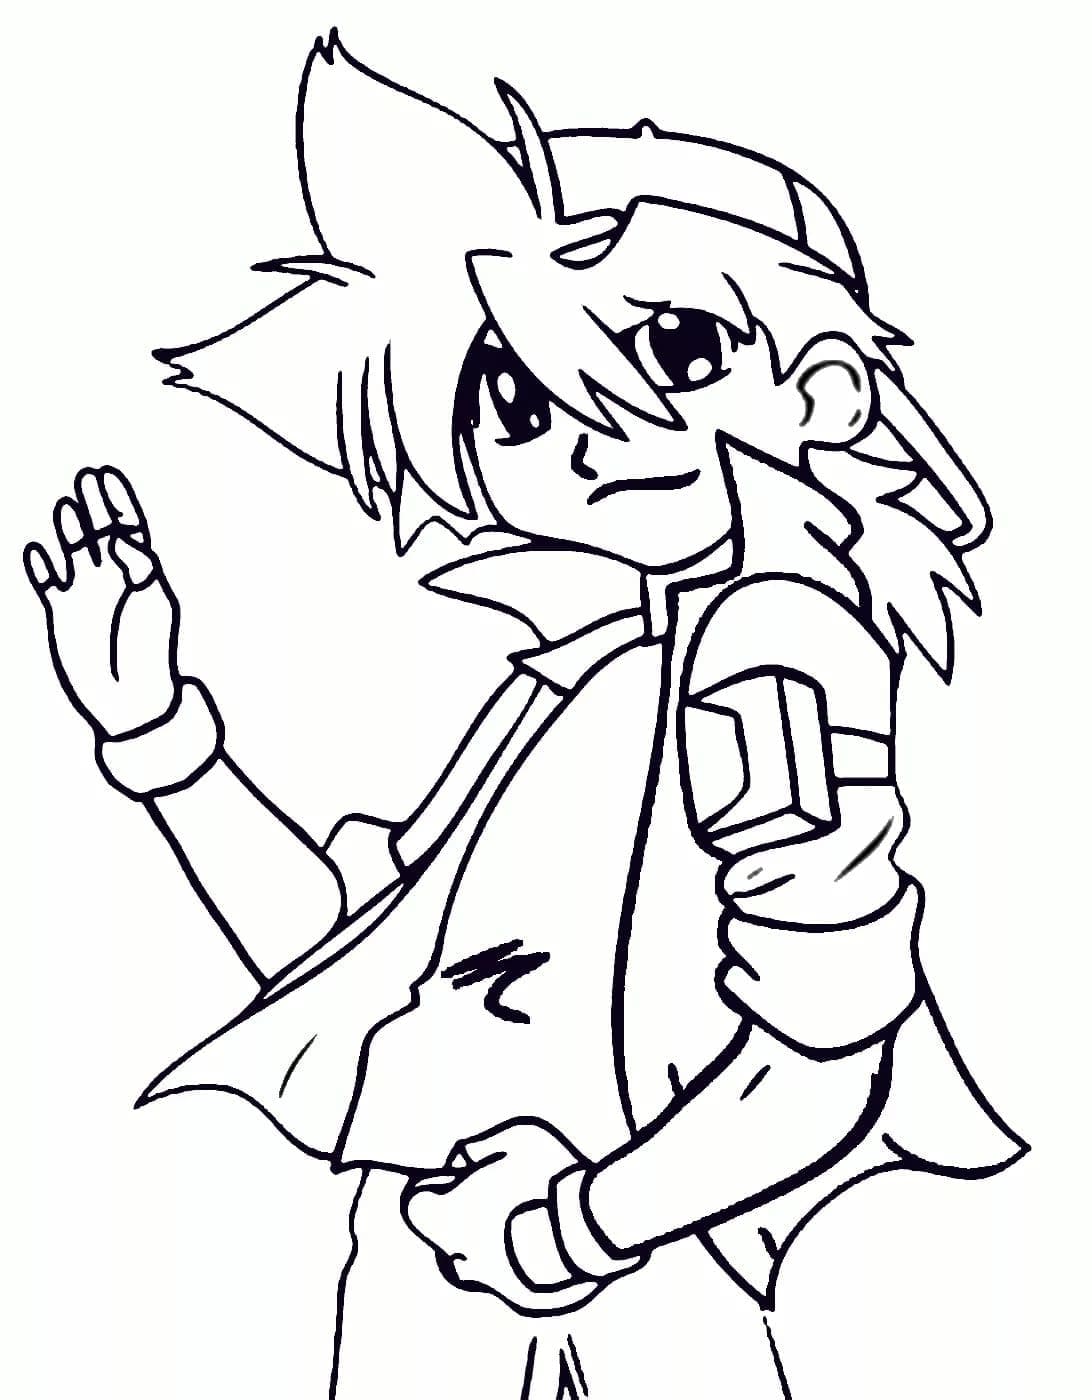 A schoolboy In The Beyblade Coloring Page